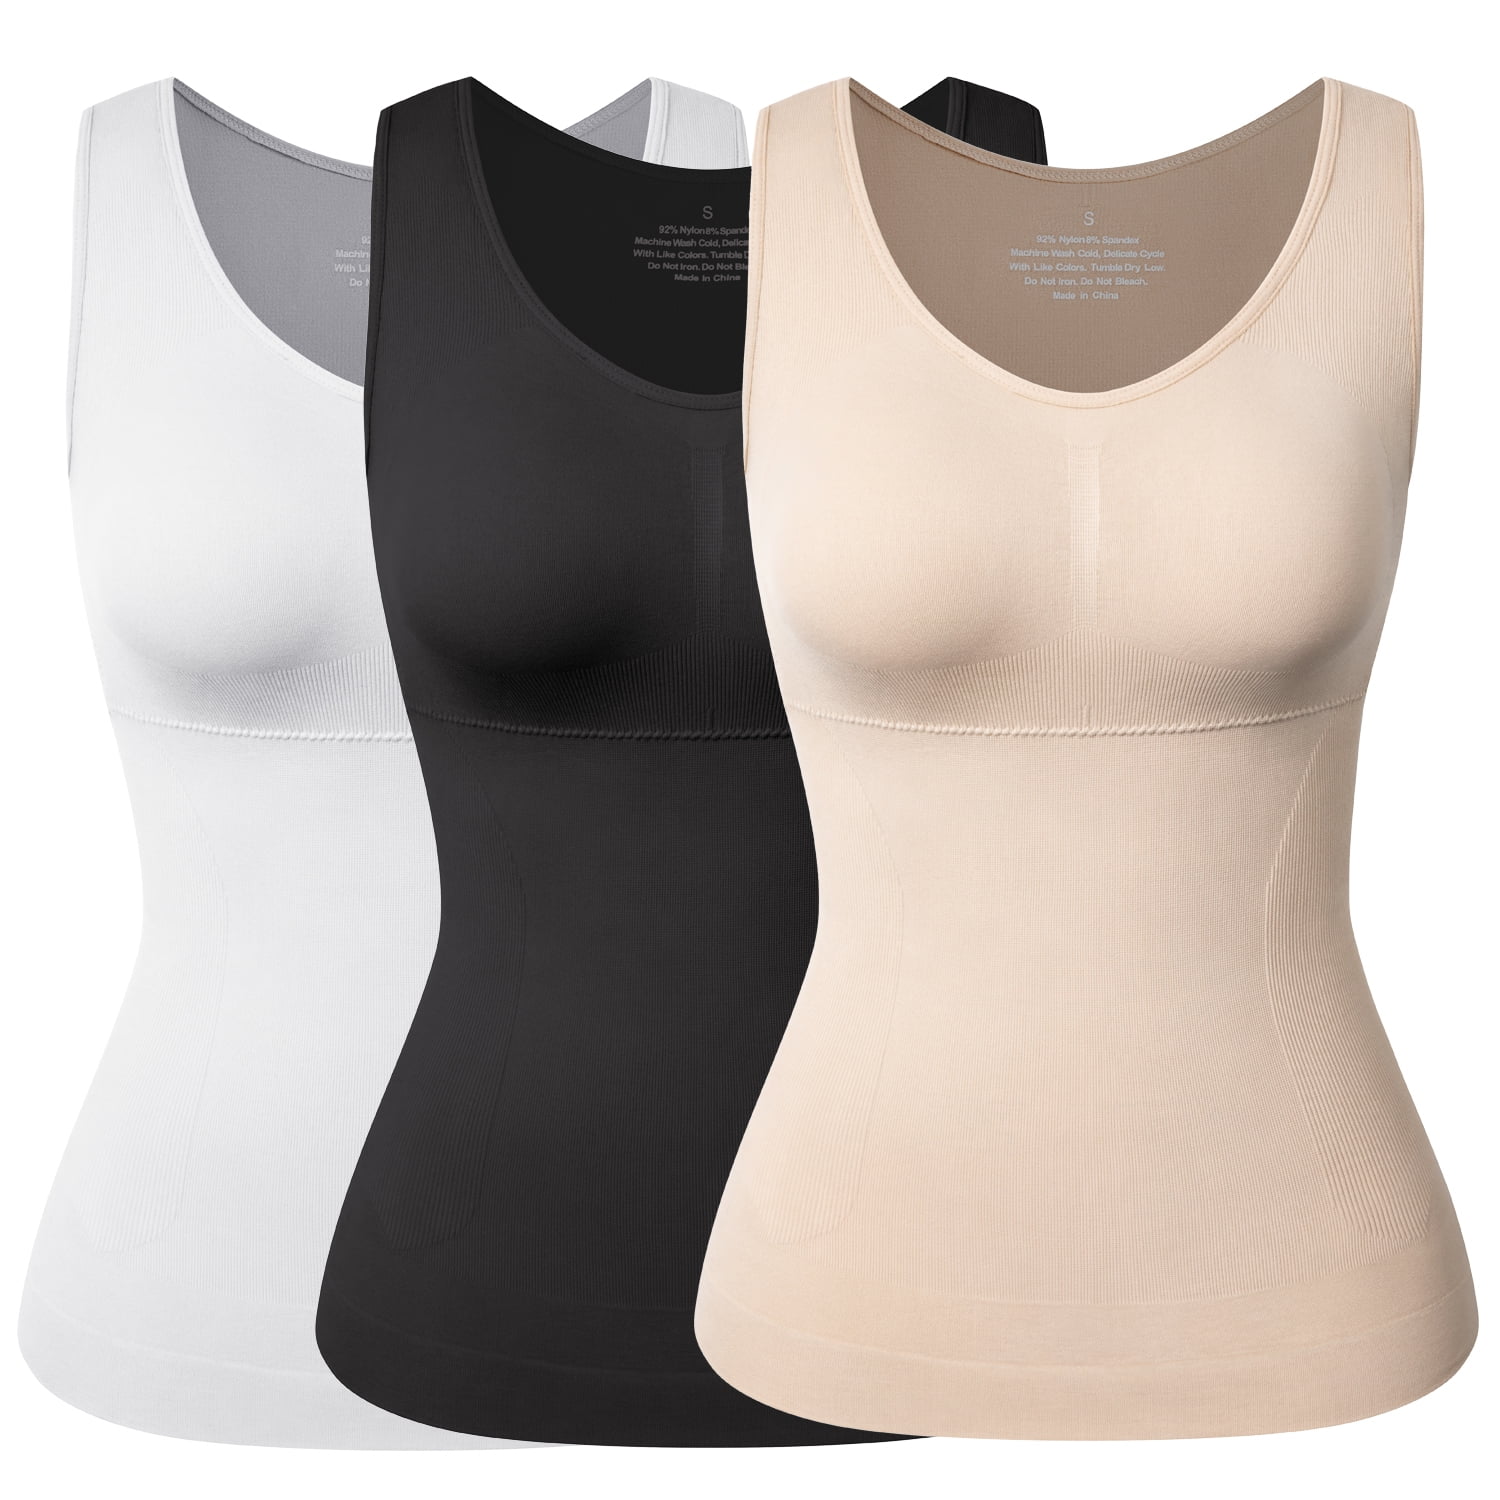 COMFREE Women's Cami Shaper Plus Size with Built in Bra Camisole